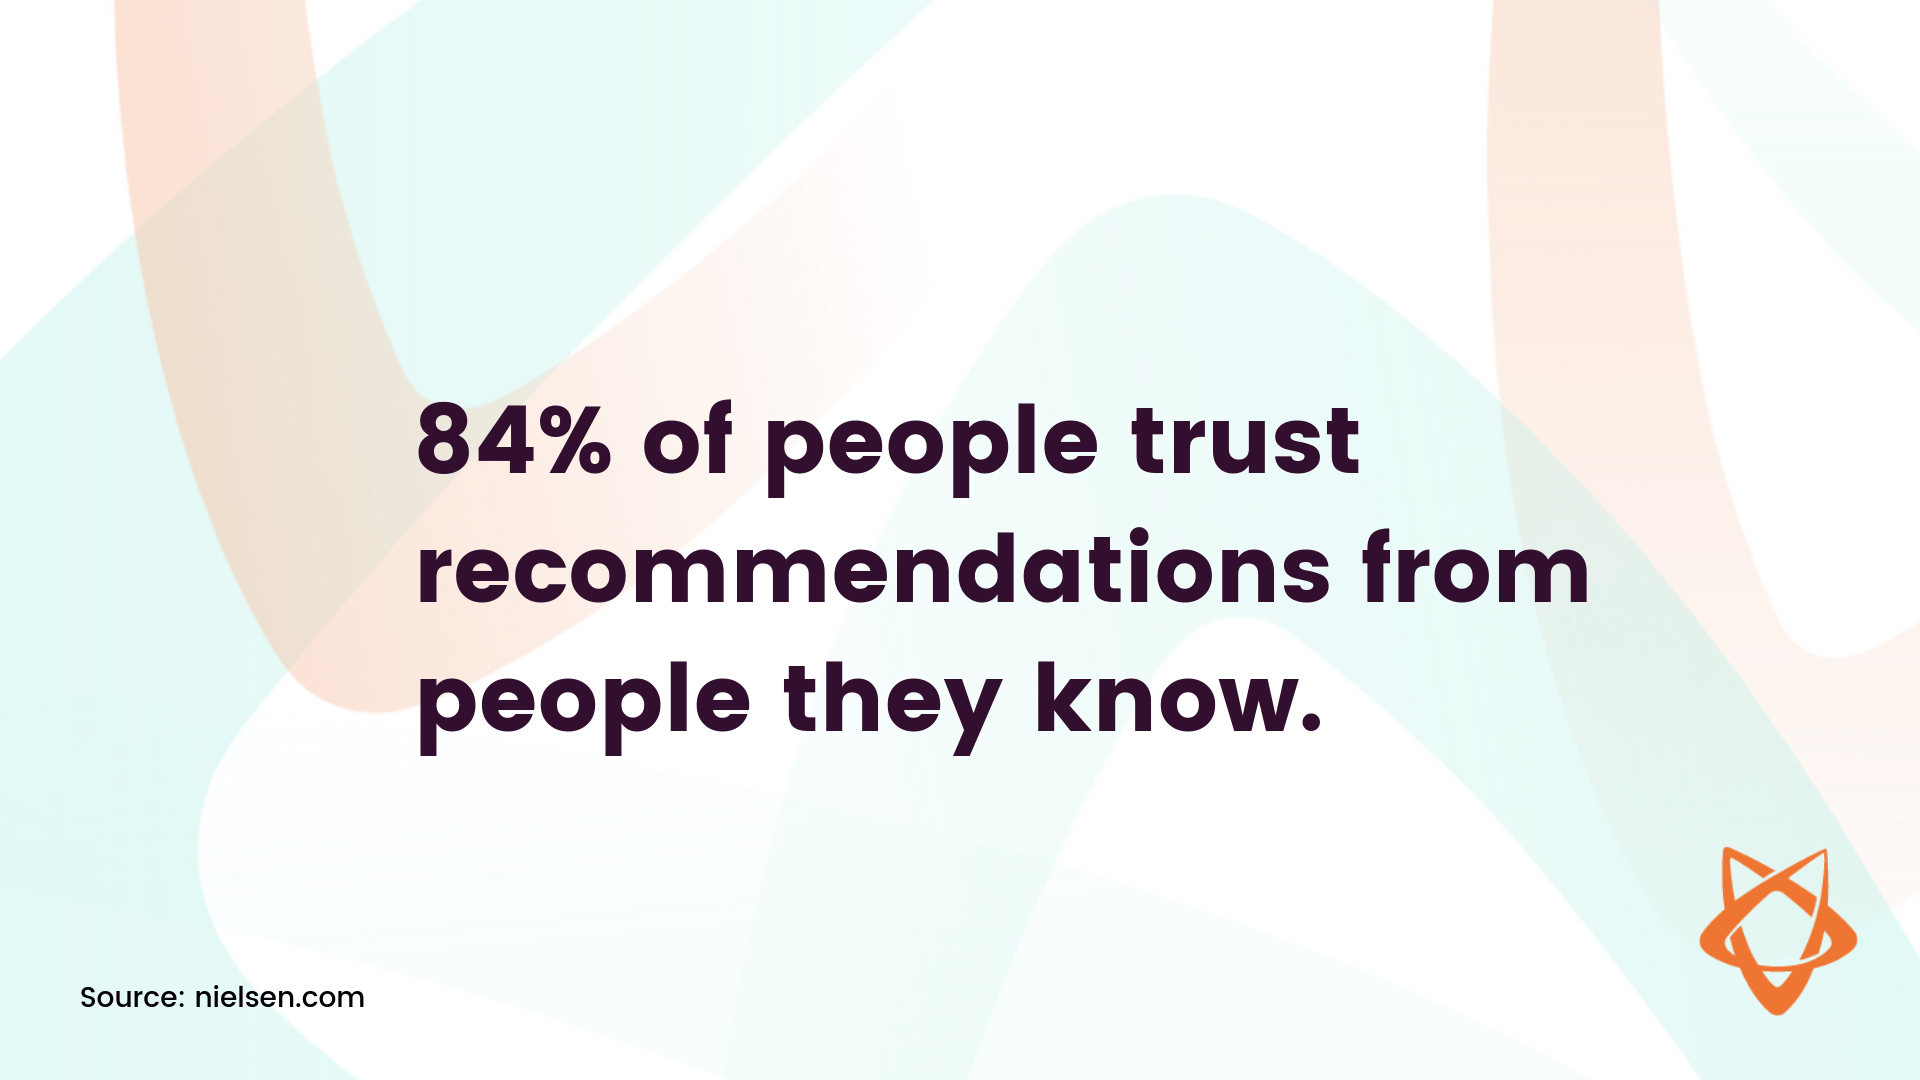 84% of people trust recommendations from people they know